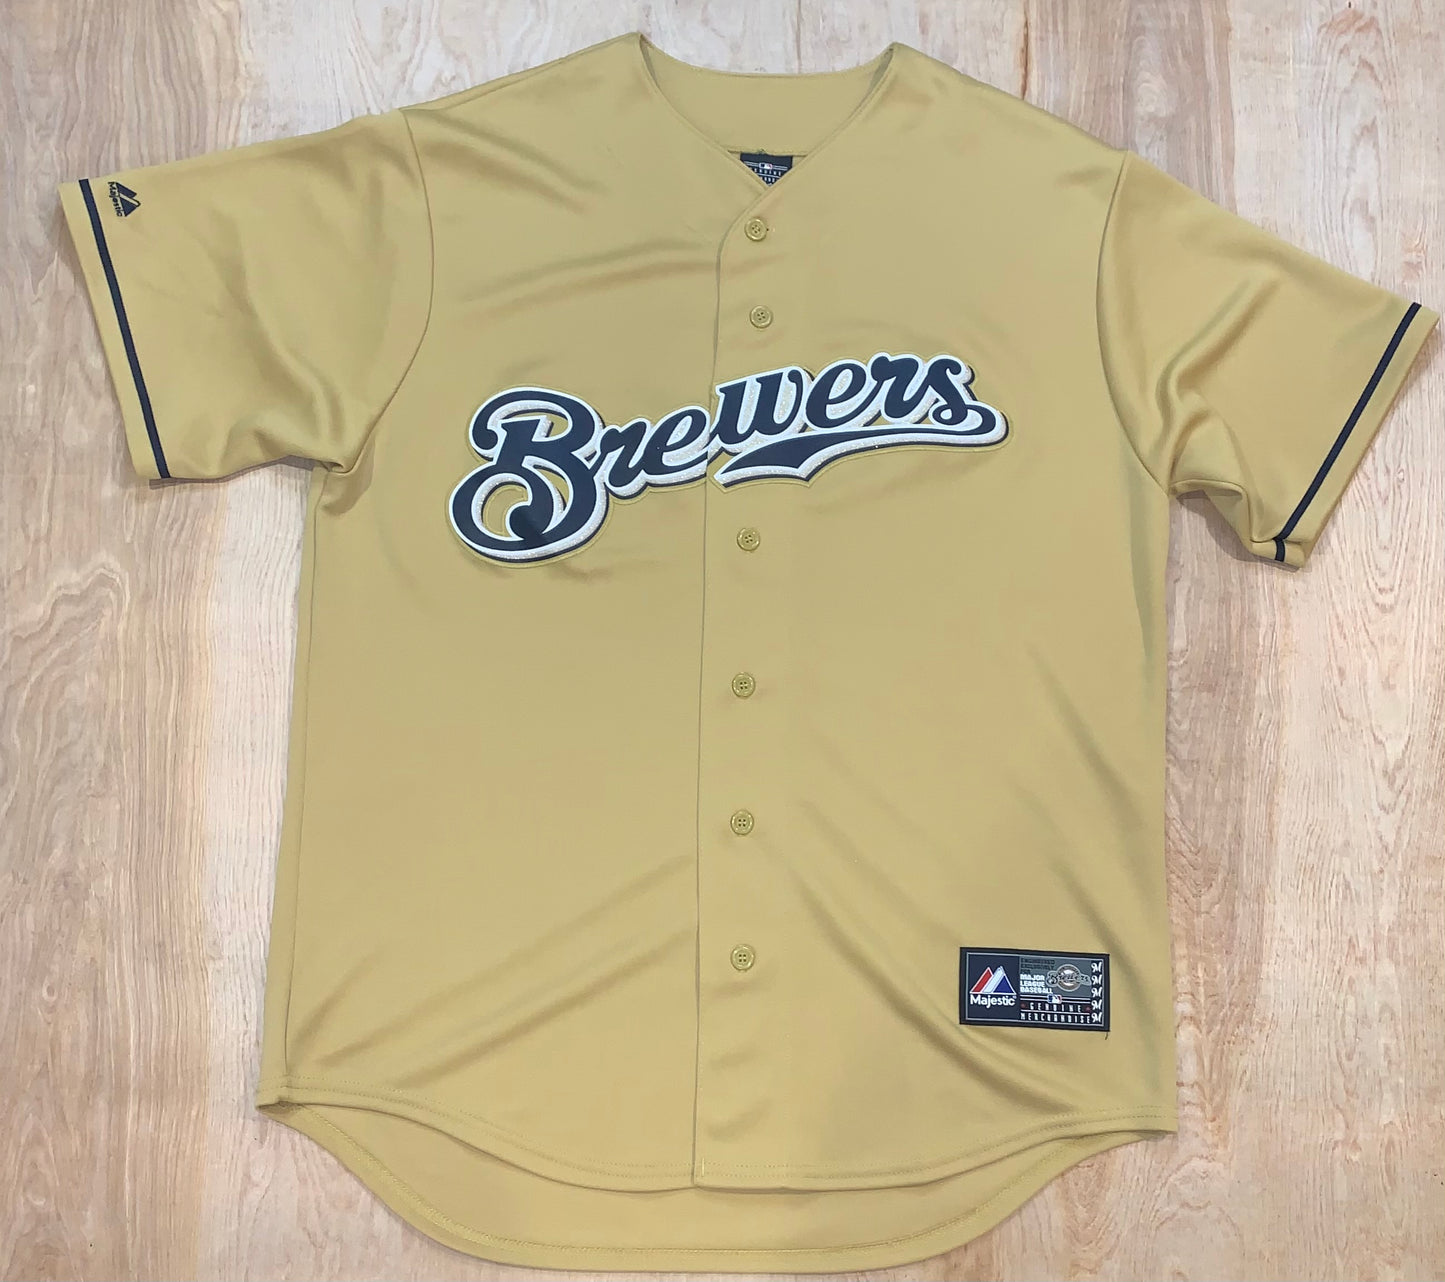 Classic Gold Brewers Jersey